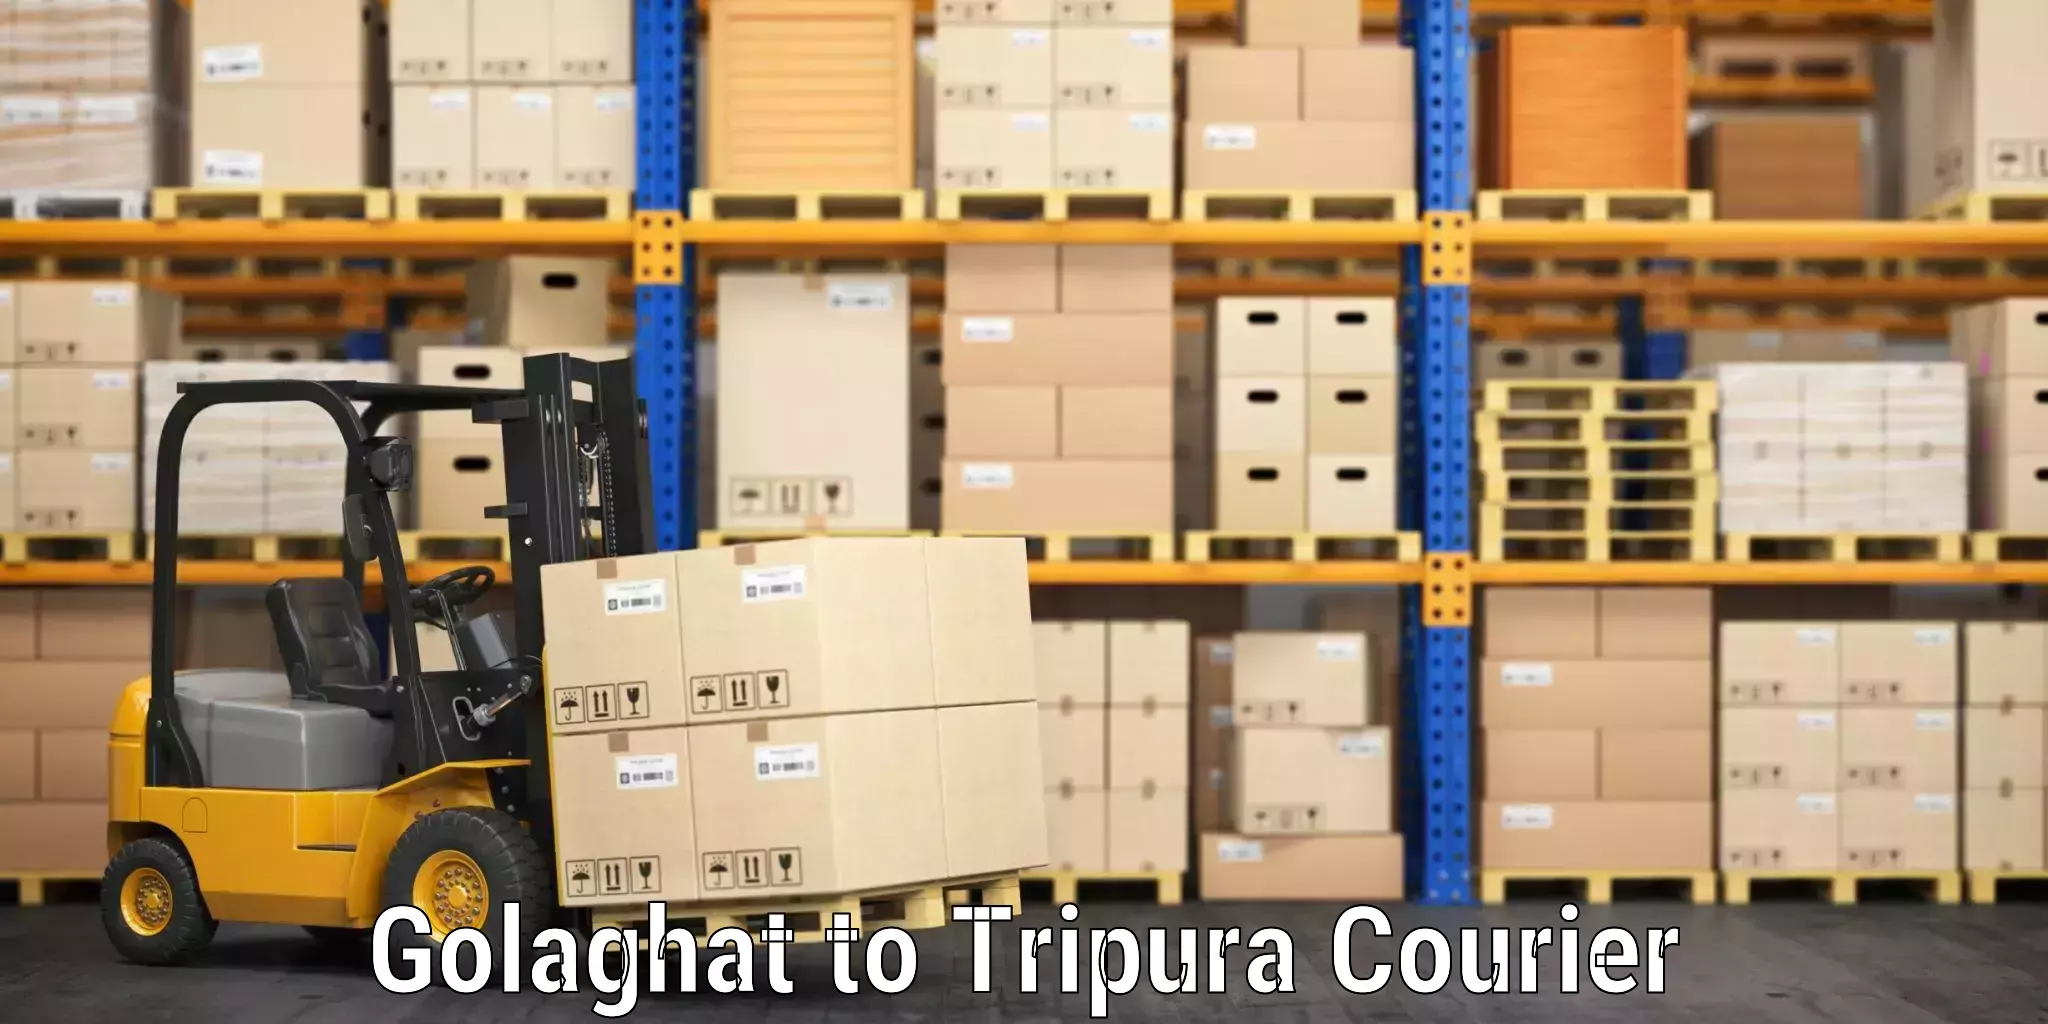 Luggage shipping service Golaghat to Tripura